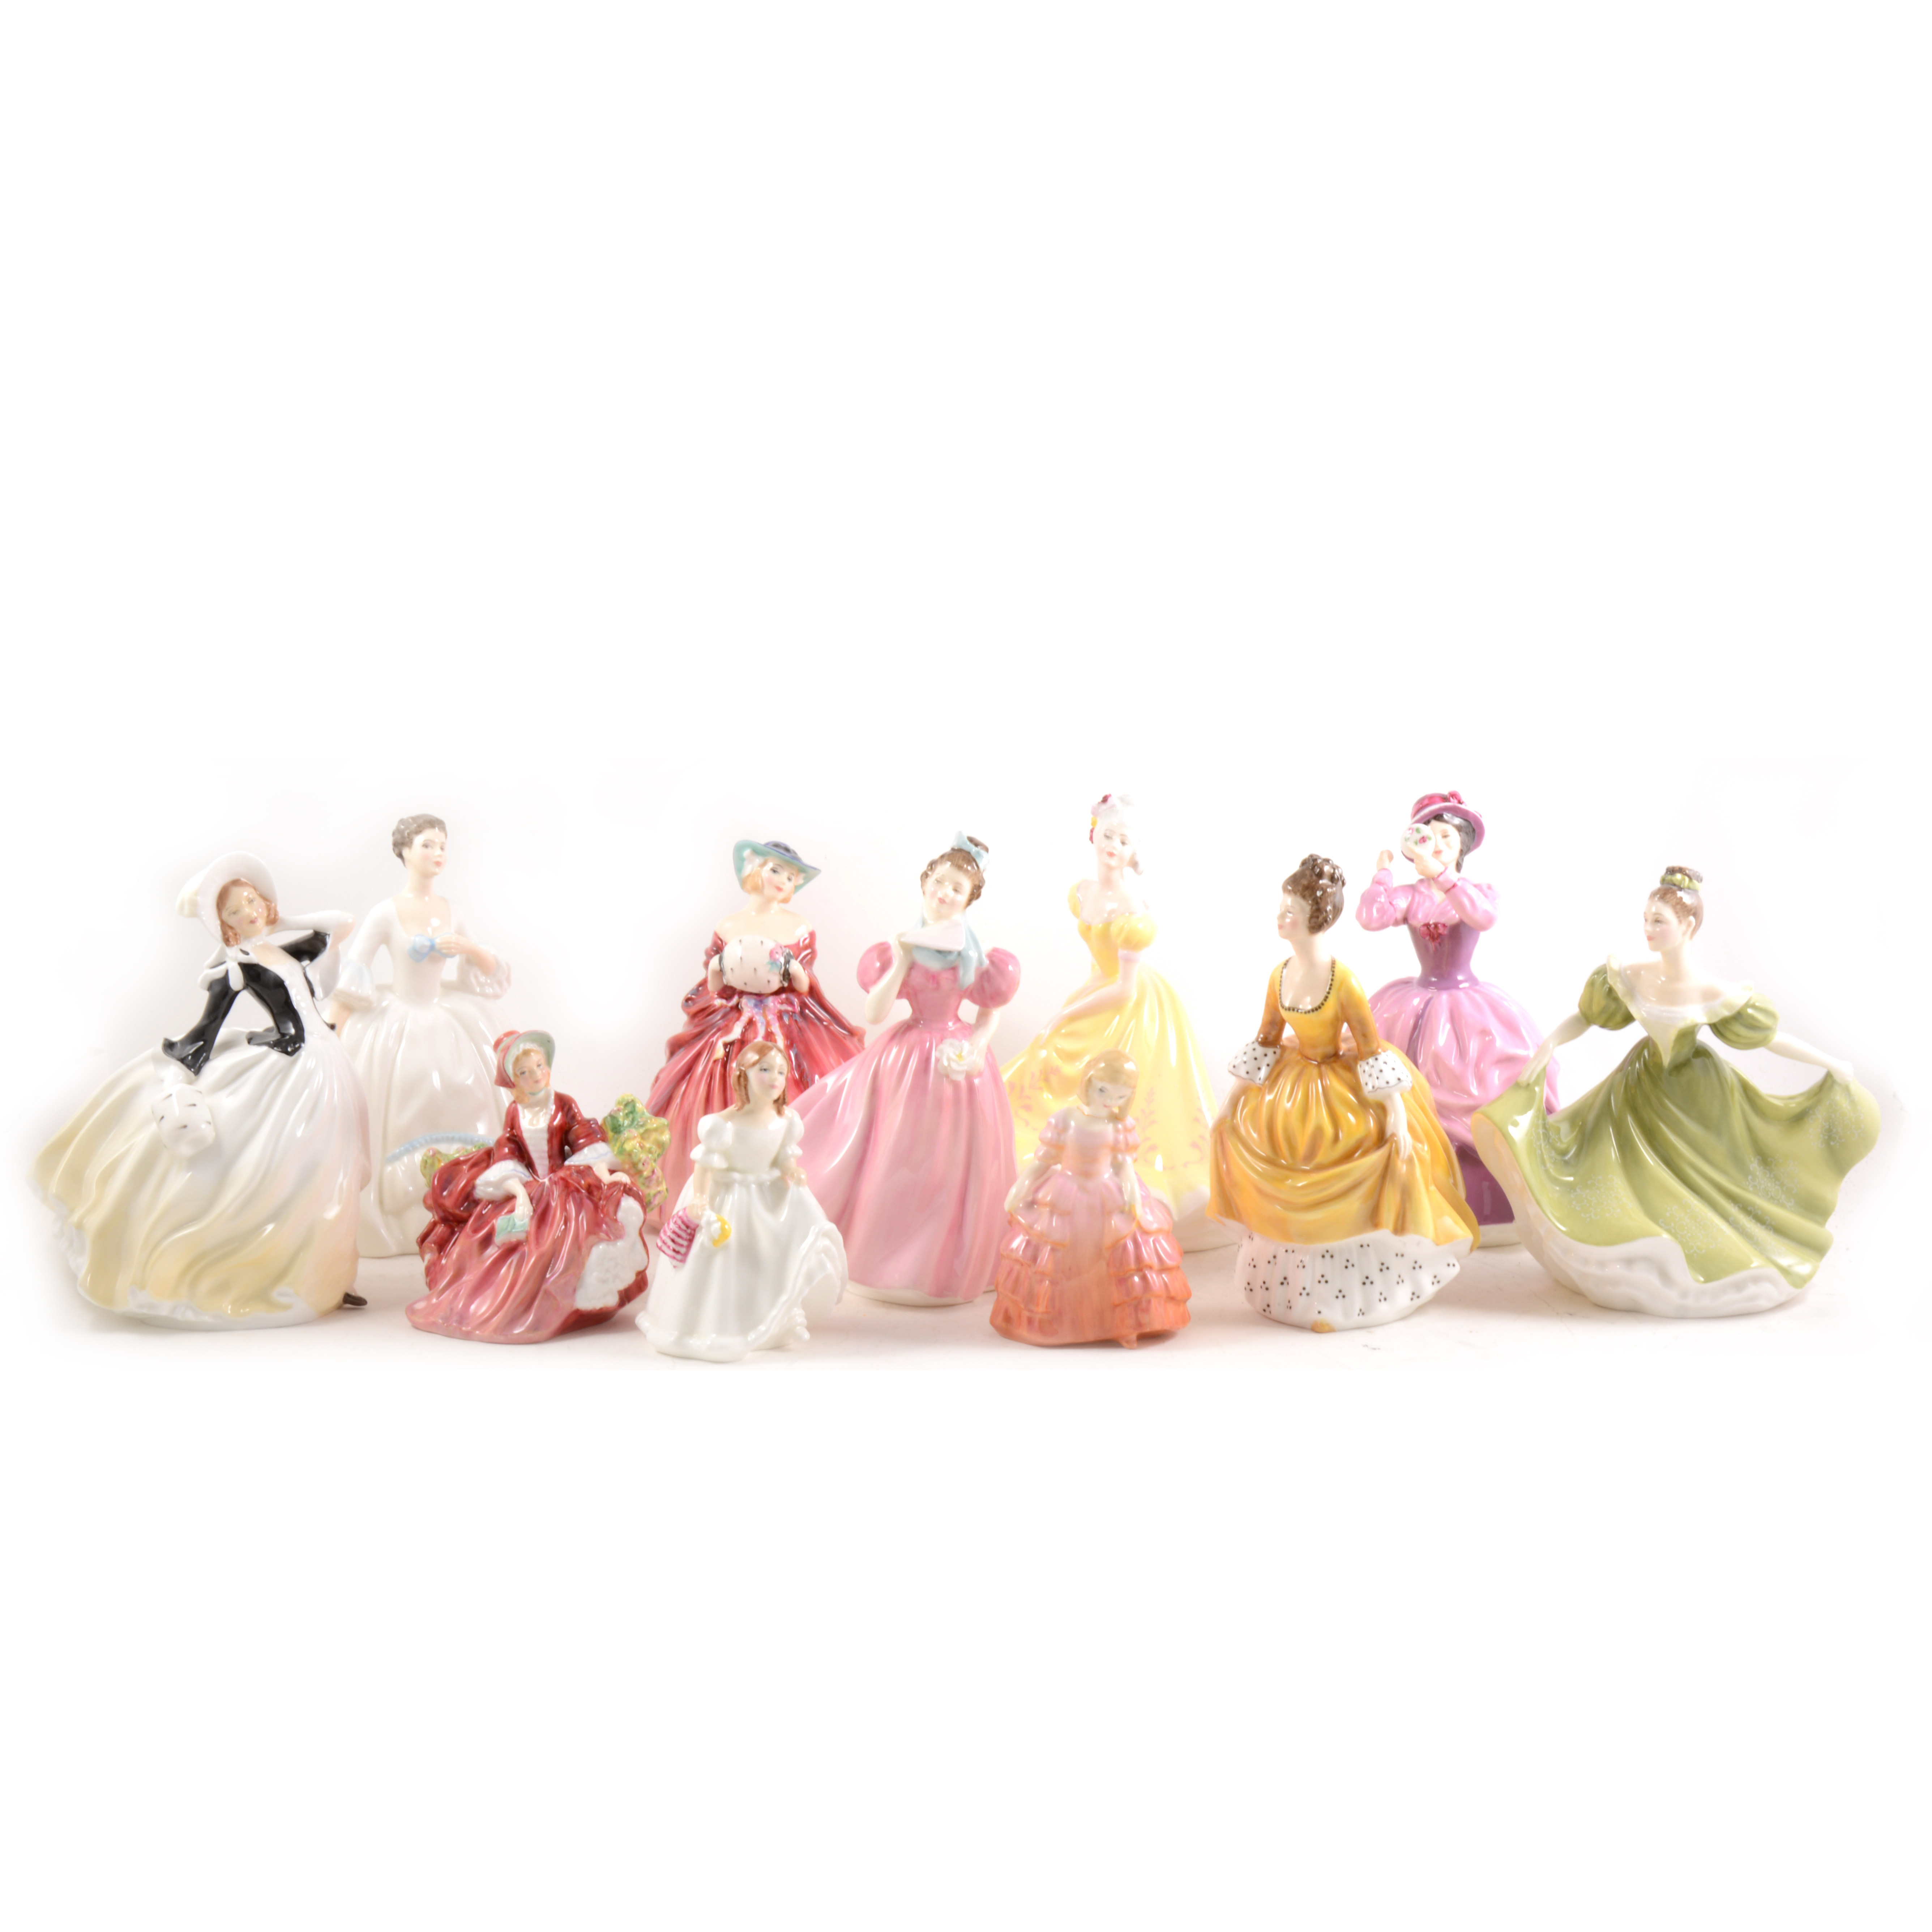 Eleven Royal Doulton lady figurines.